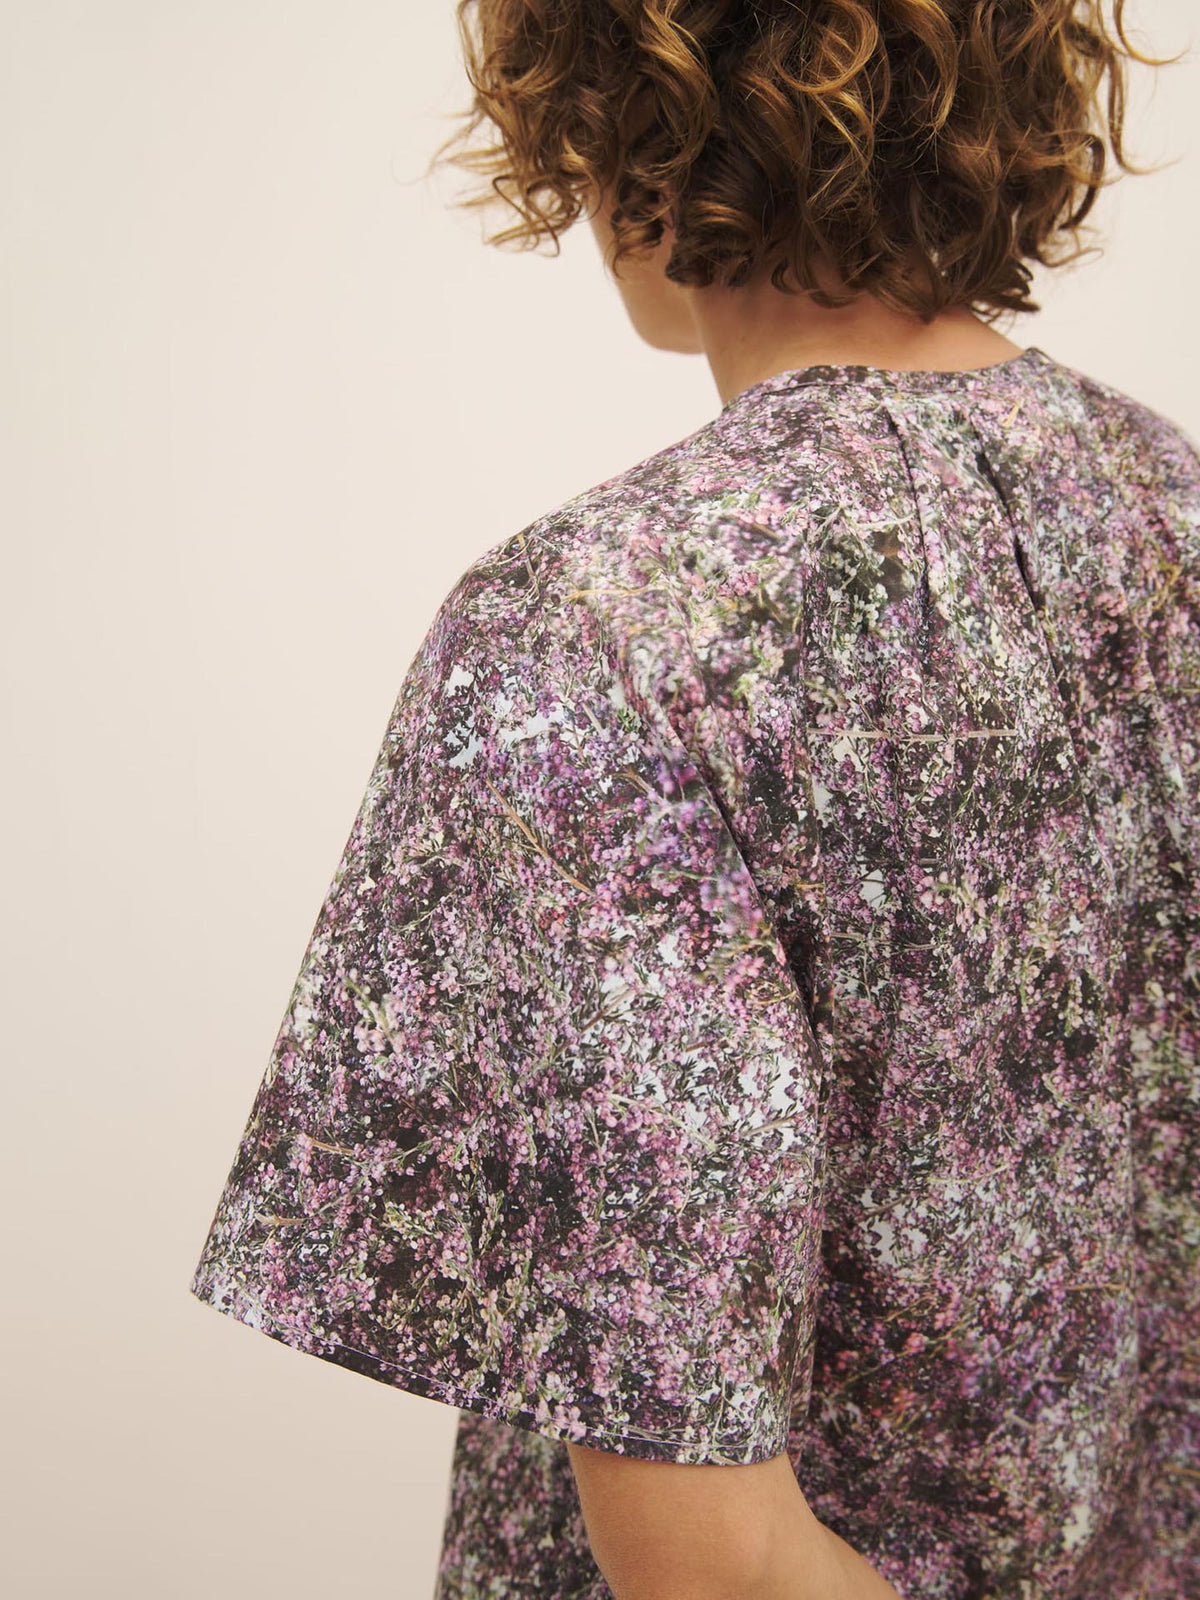 Person wearing a floral-patterned Kowtow Etude Top – Bouquet with an oversized fit, focusing on the shoulder and back area.